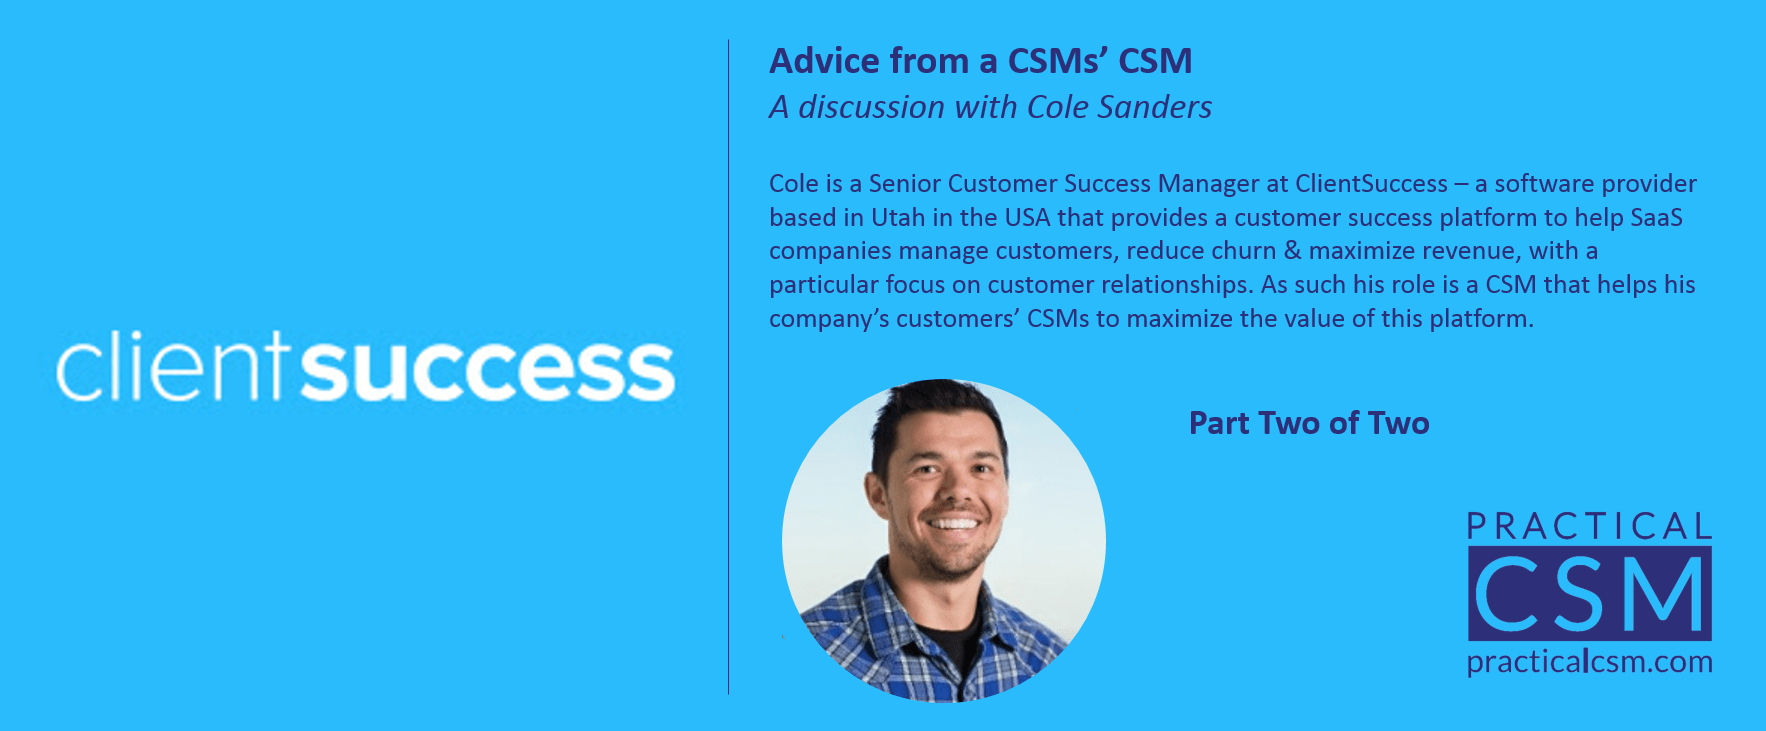 Practical CSM Advice from a CSMs' CSM with Cole Sanders part 2